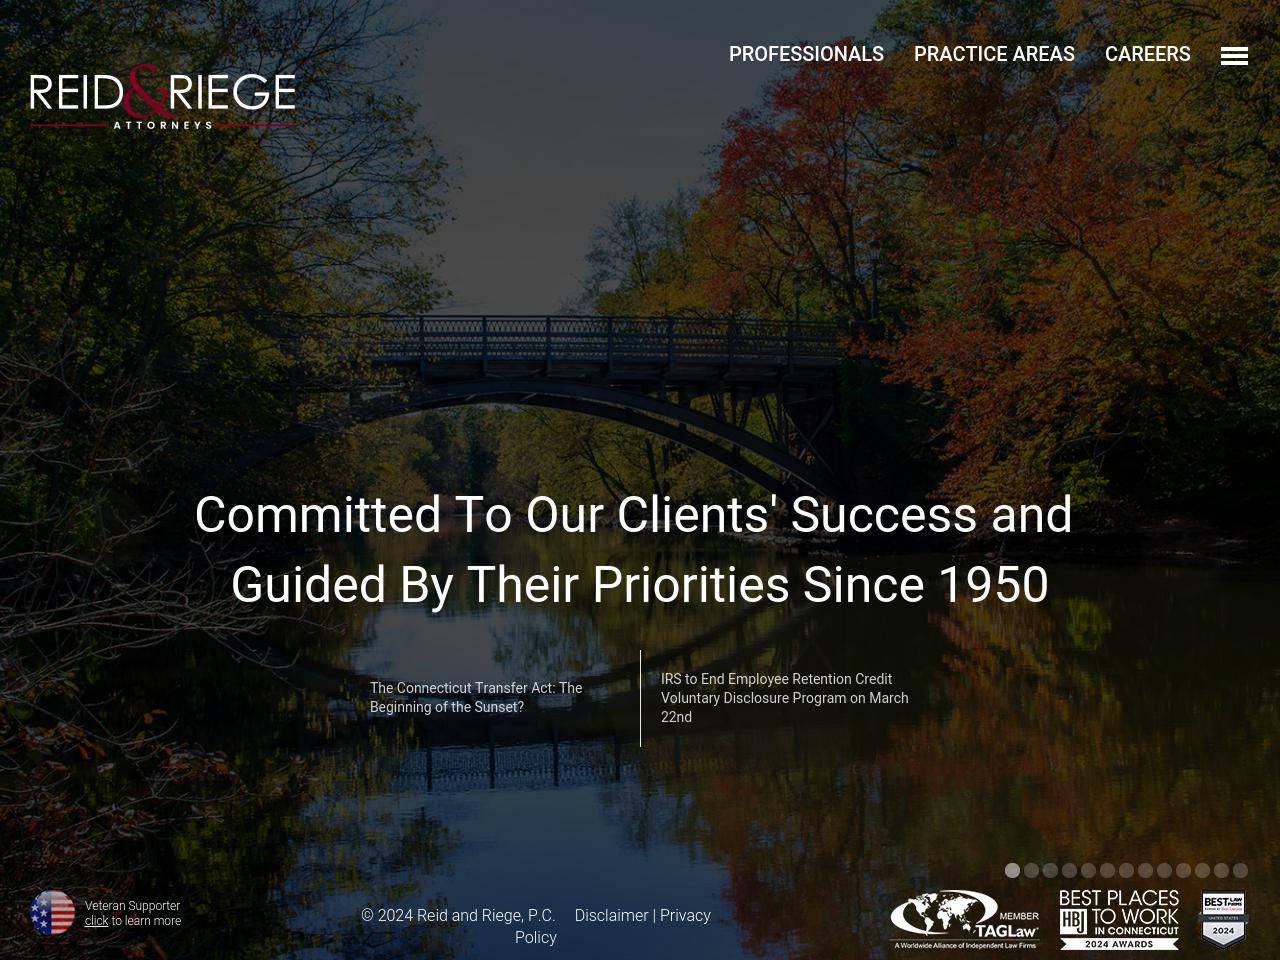 Reid and Riege P.C. - New Haven CT Lawyers